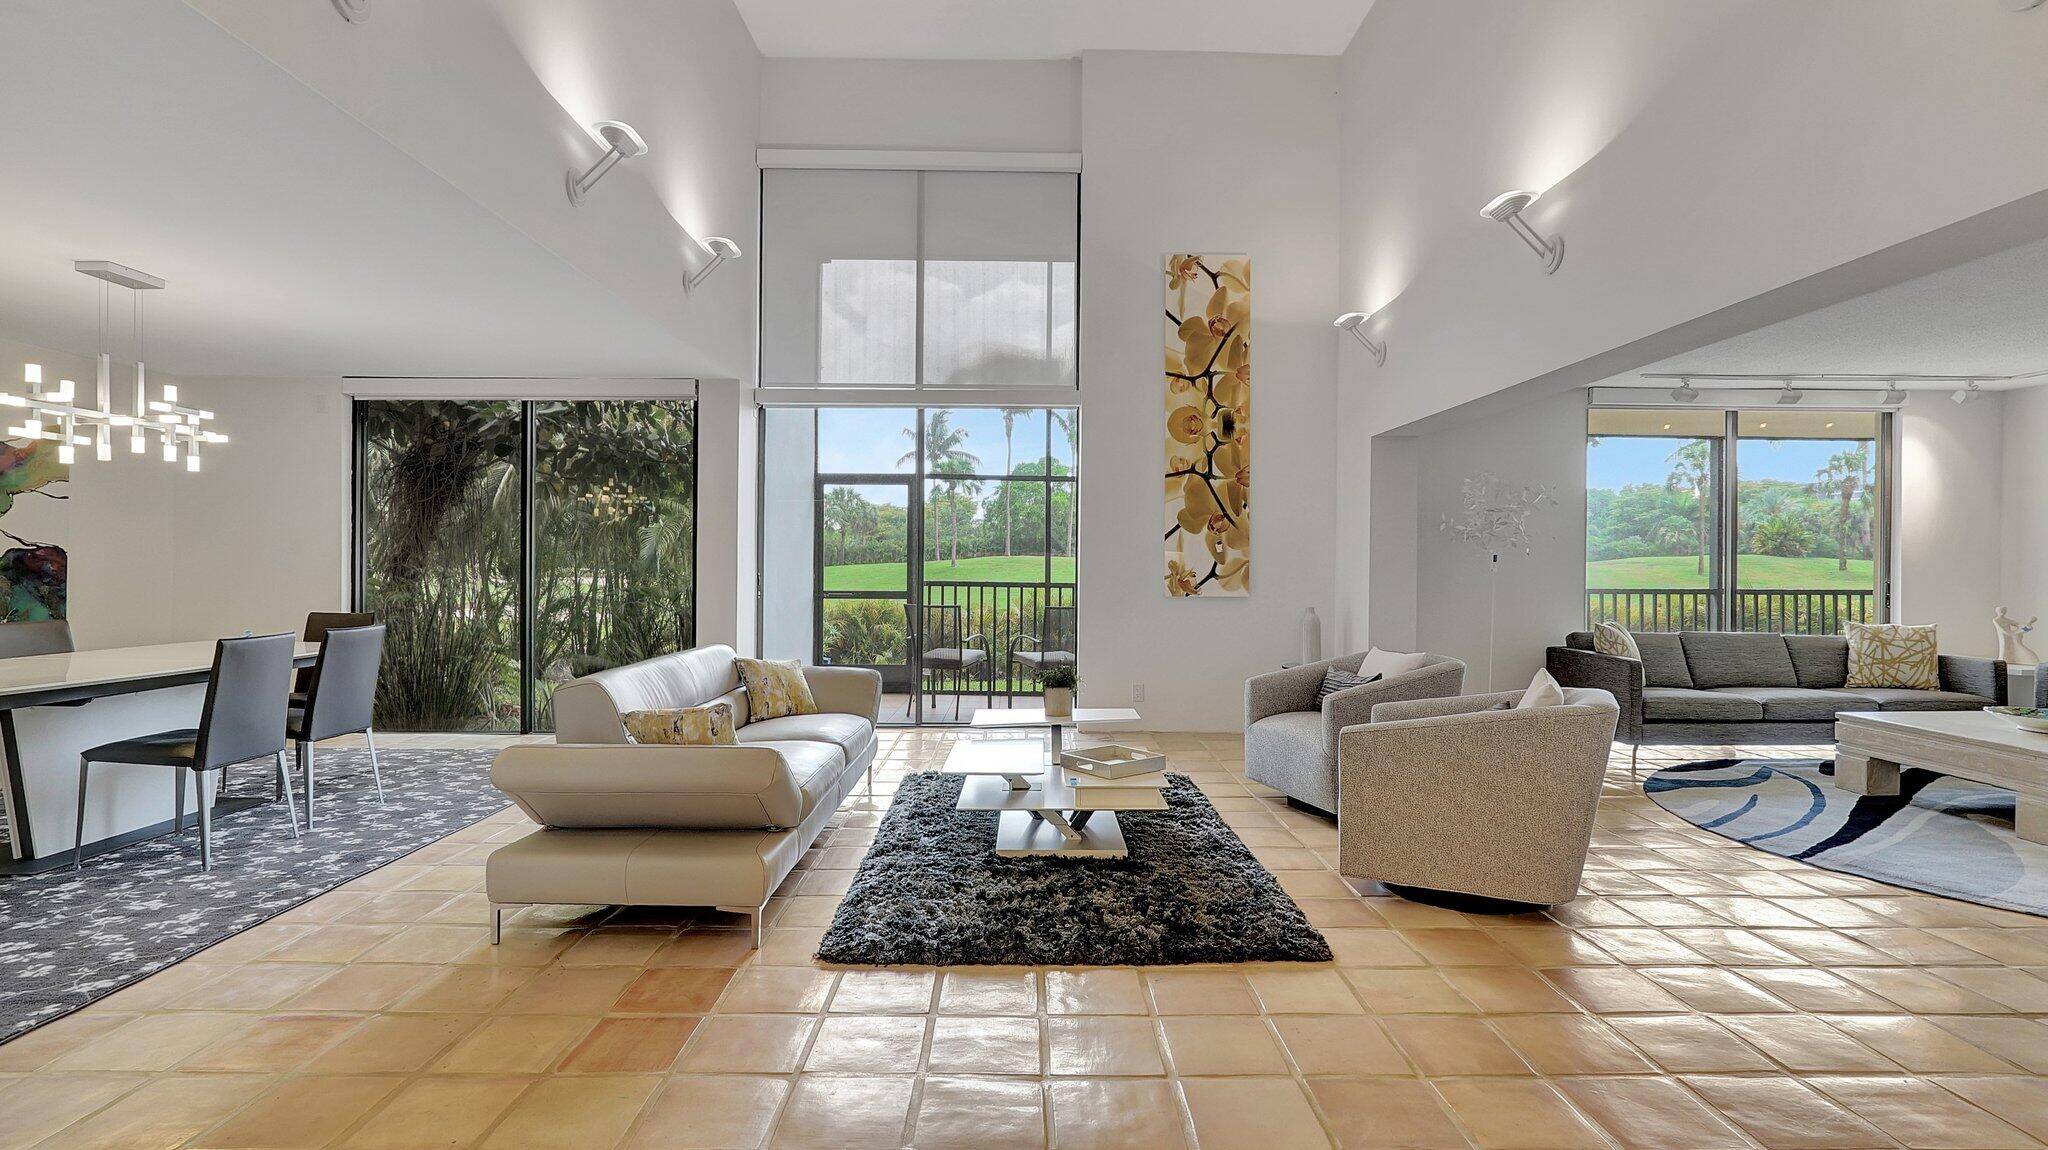 Luxury Living in the Heart of AventuraNestled in the prestigious gated community of Aventura, this stunning 3 bedroom, 4 bathroom residence offers the epitome of luxury living.